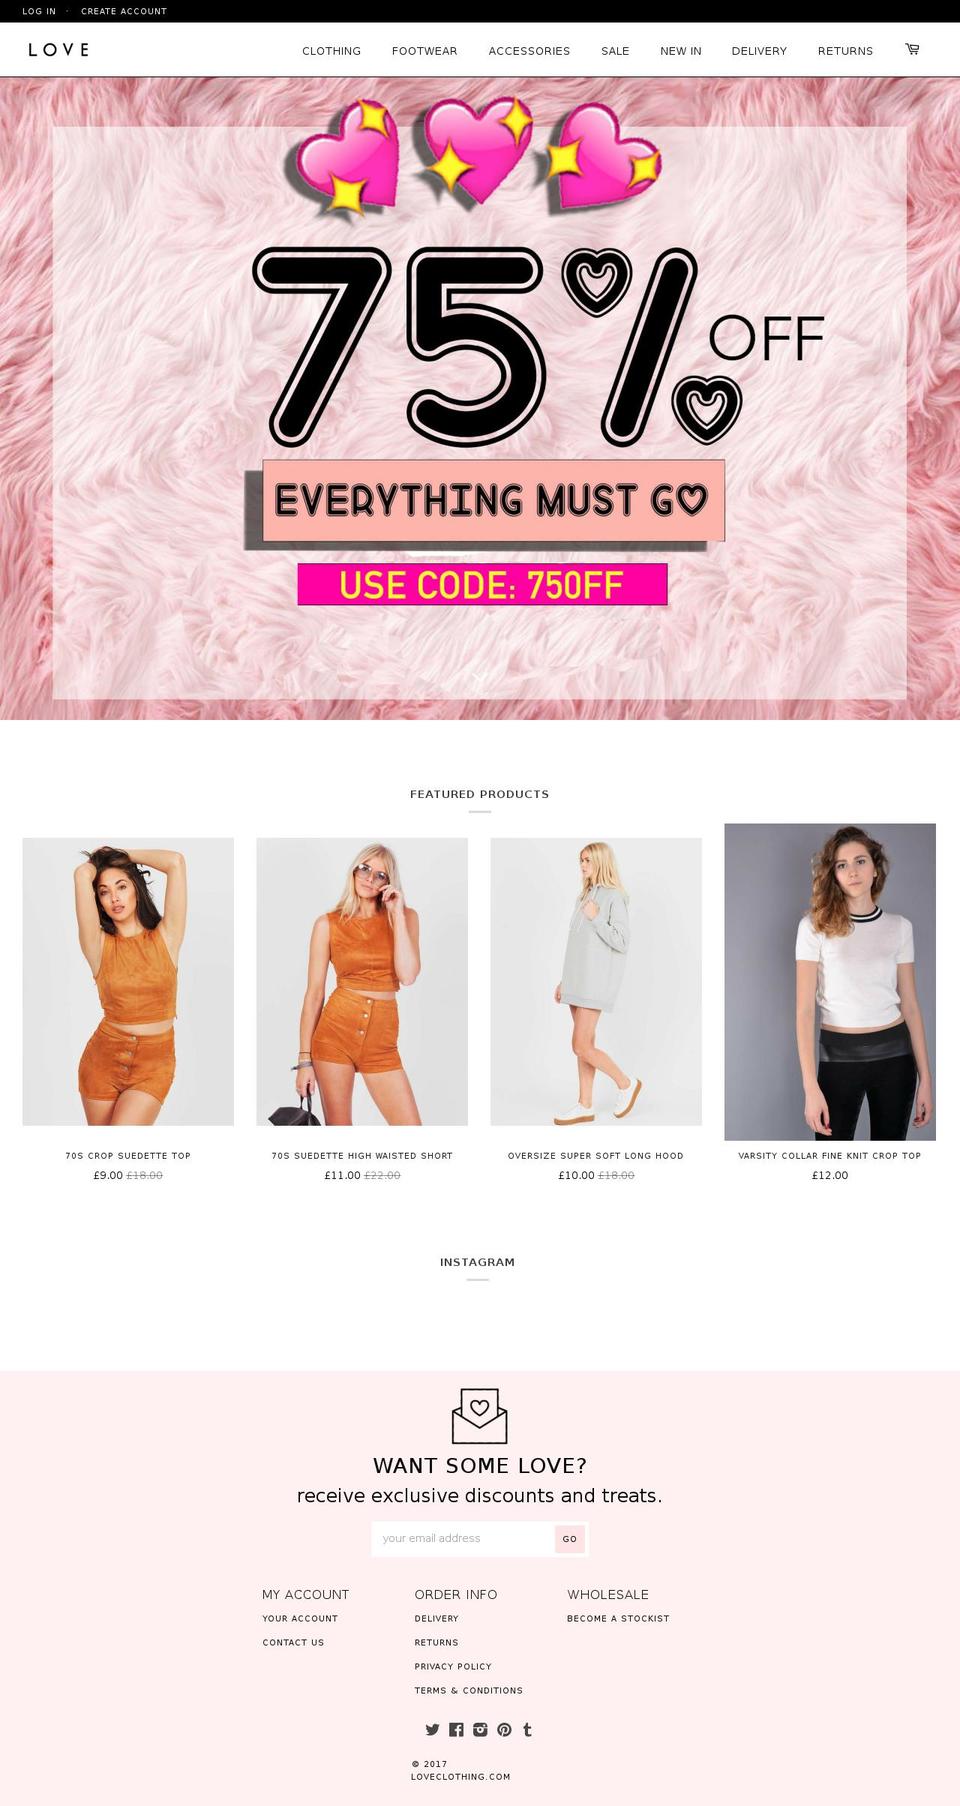 Showcase Shopify theme site example loveclothing.com